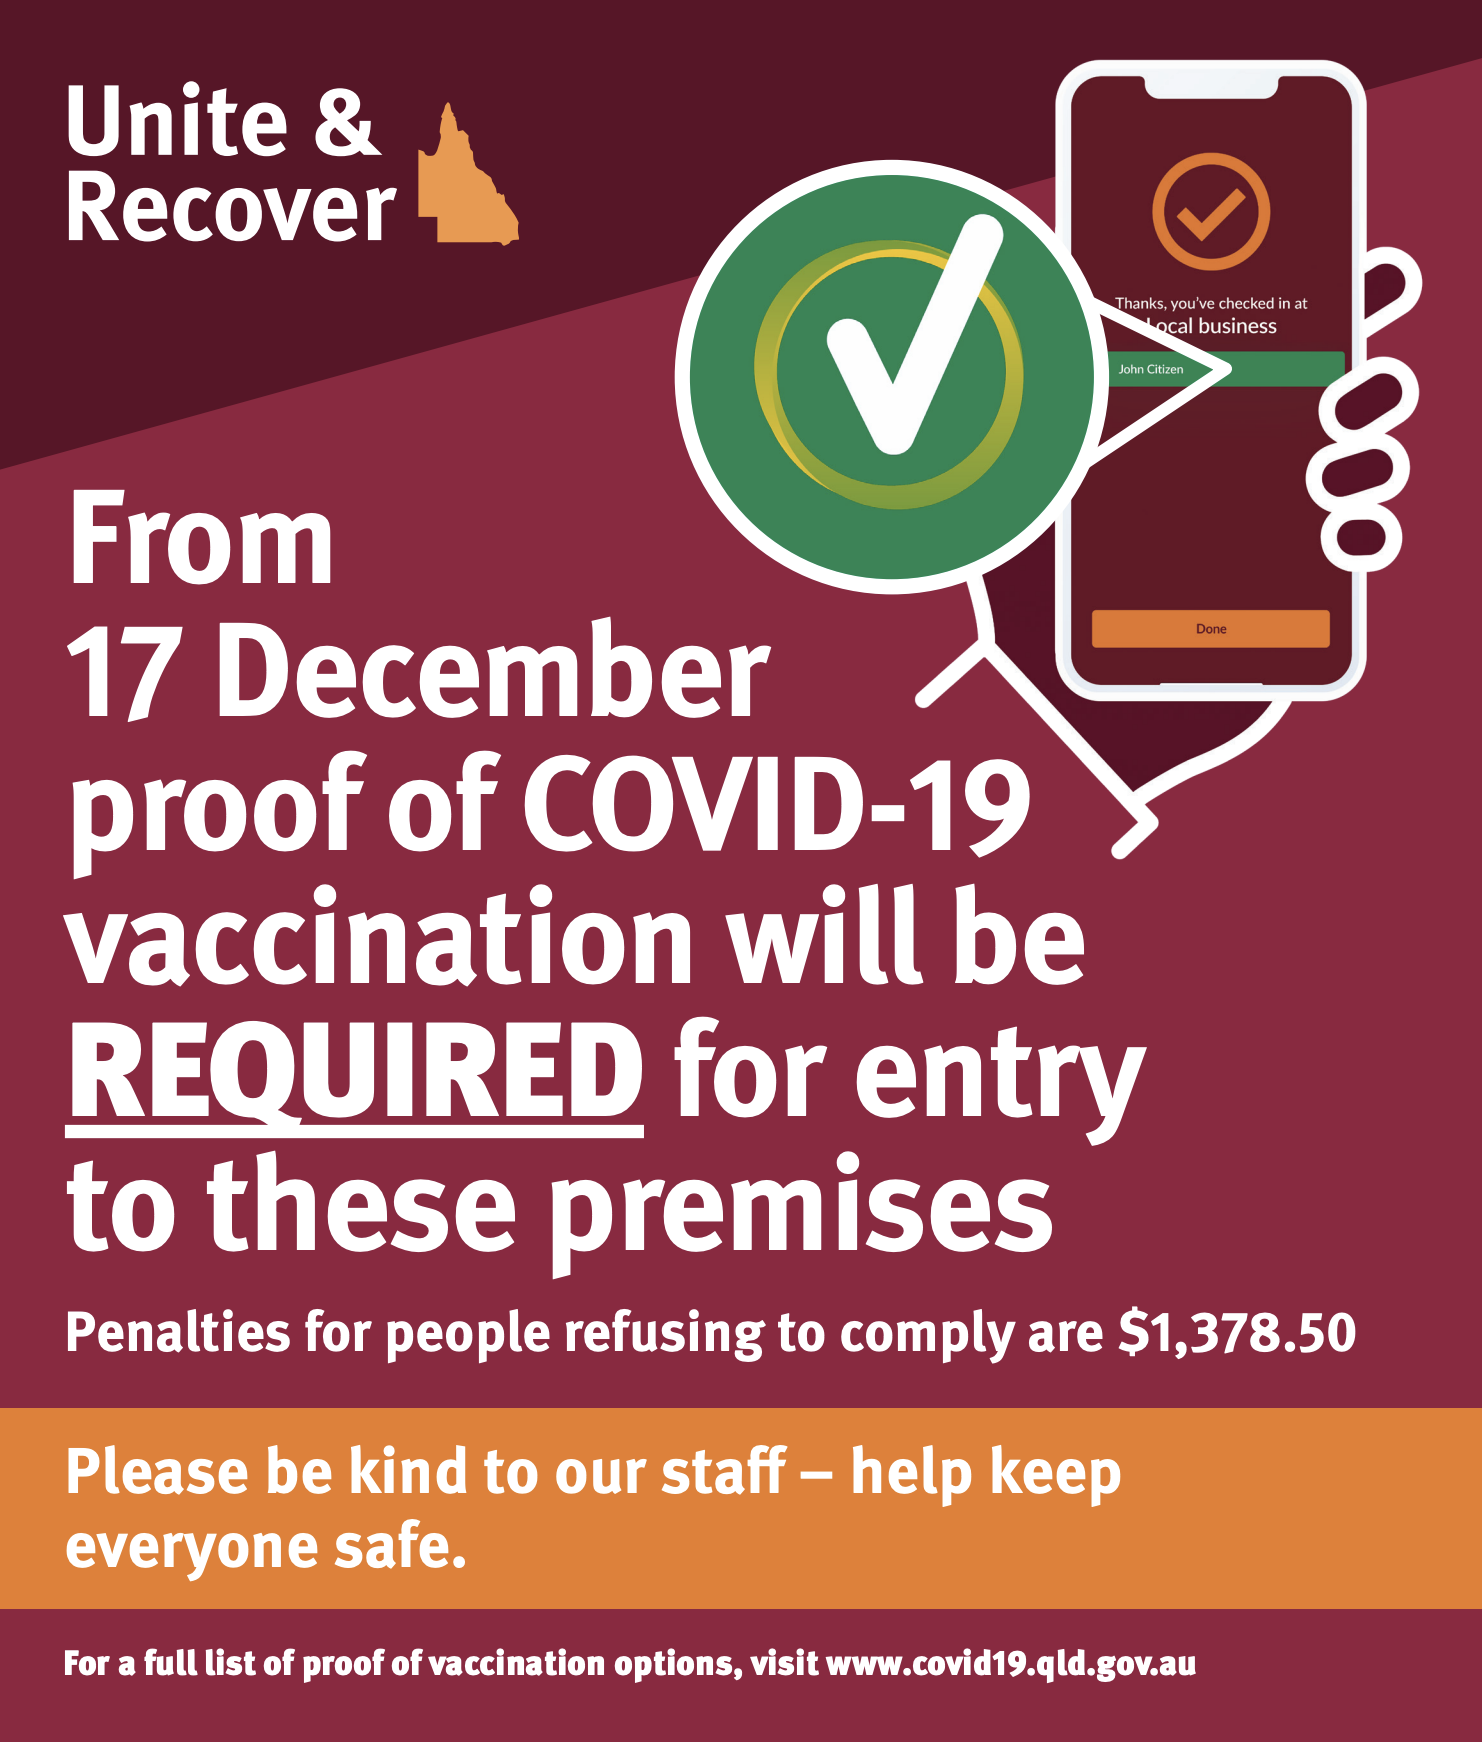 unite and recover proof of vaccination required poster